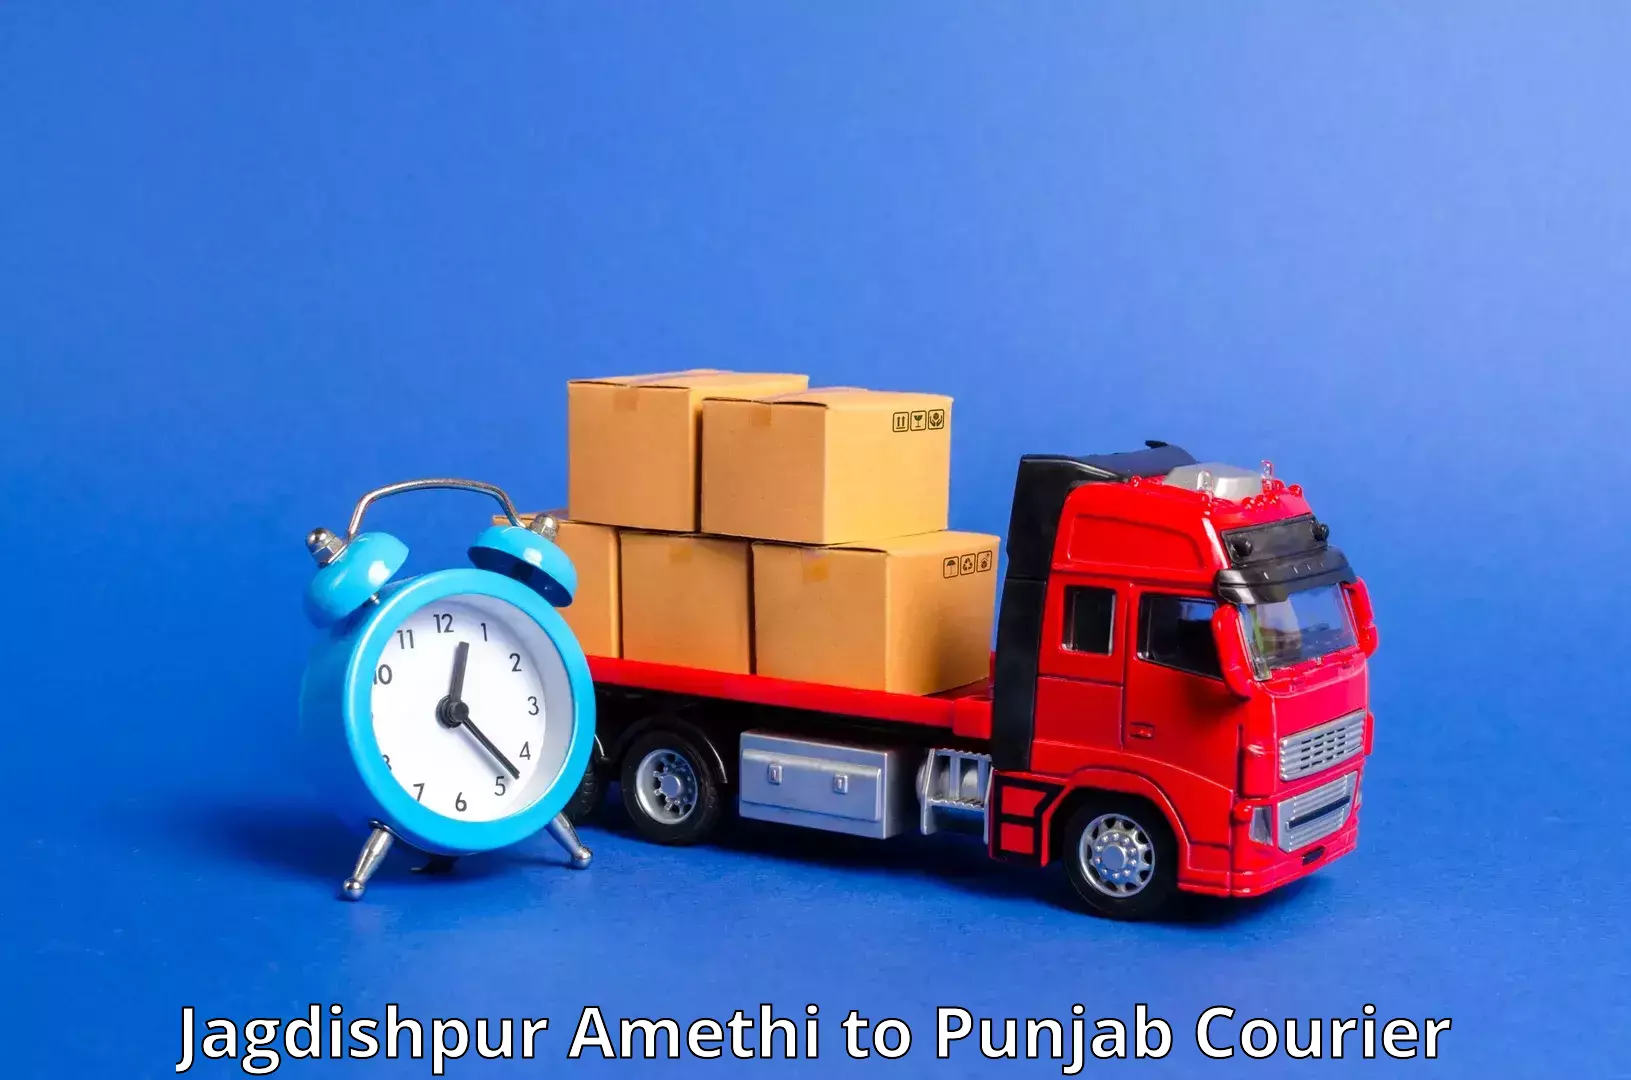 Courier service booking Jagdishpur Amethi to Malout